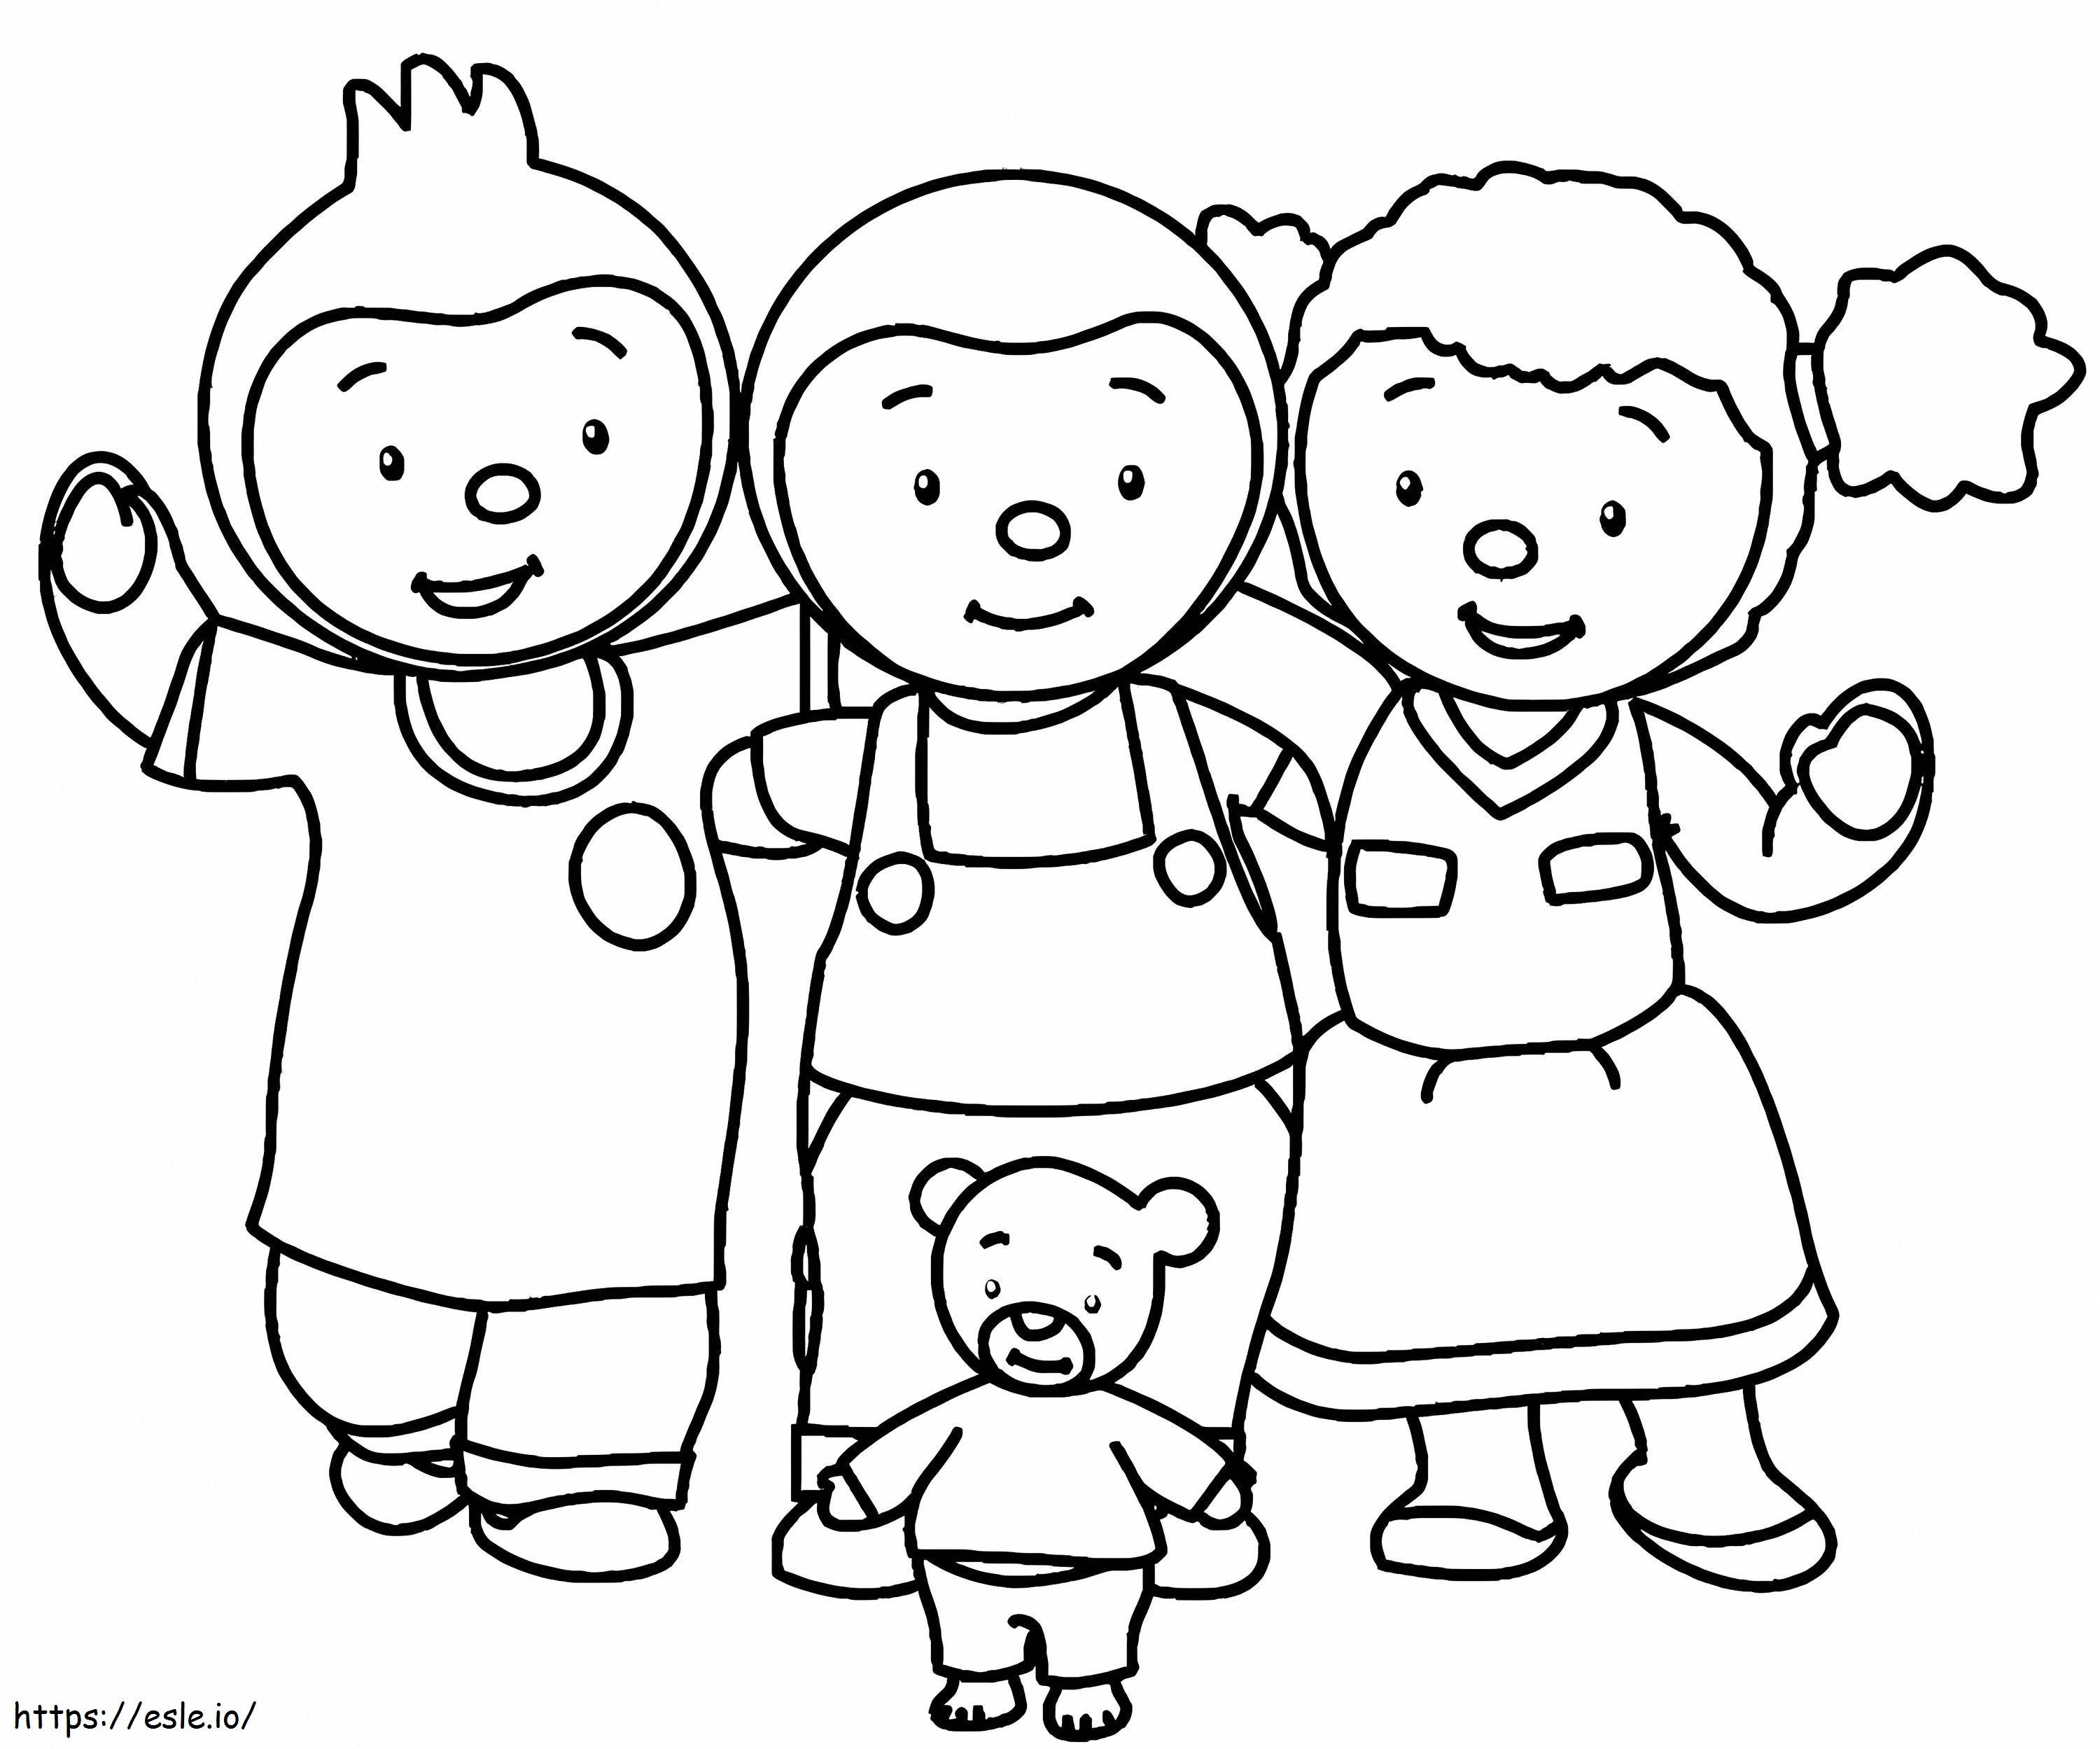 Tchoupi coloring page